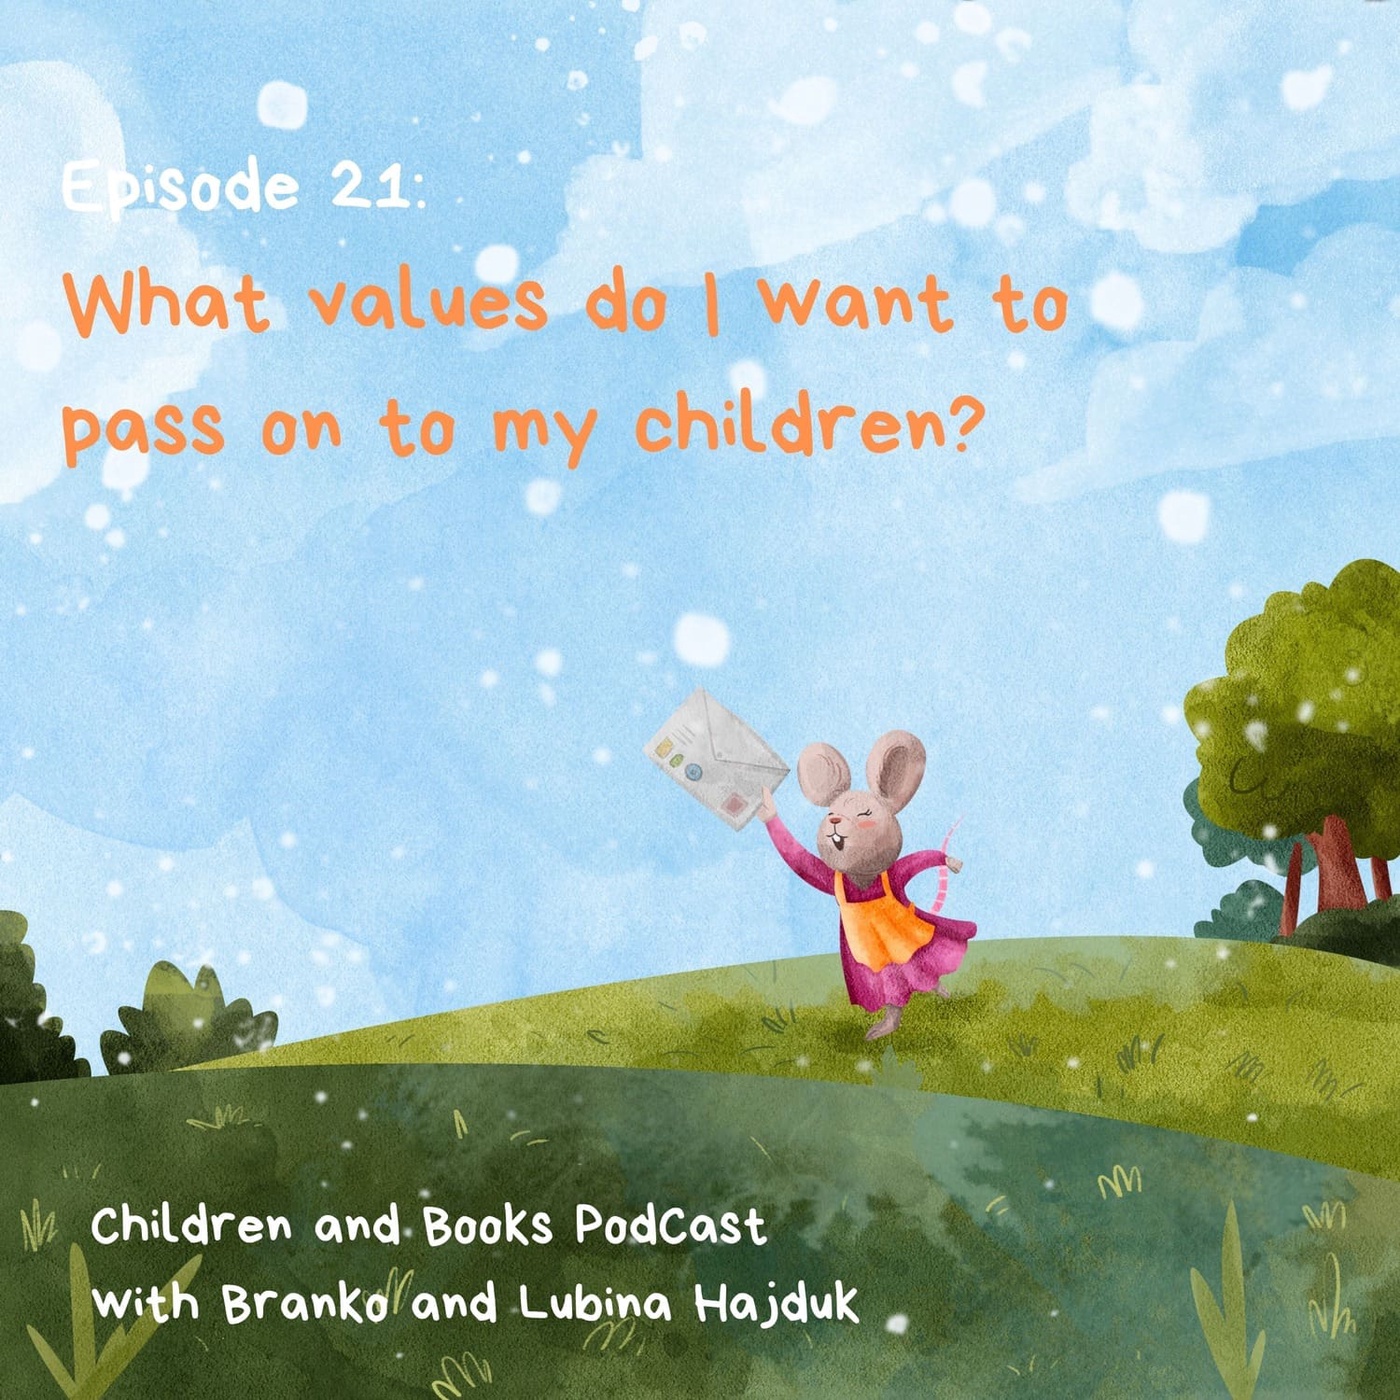 What values do I want to pass on to my children? - Children and Books PodCast